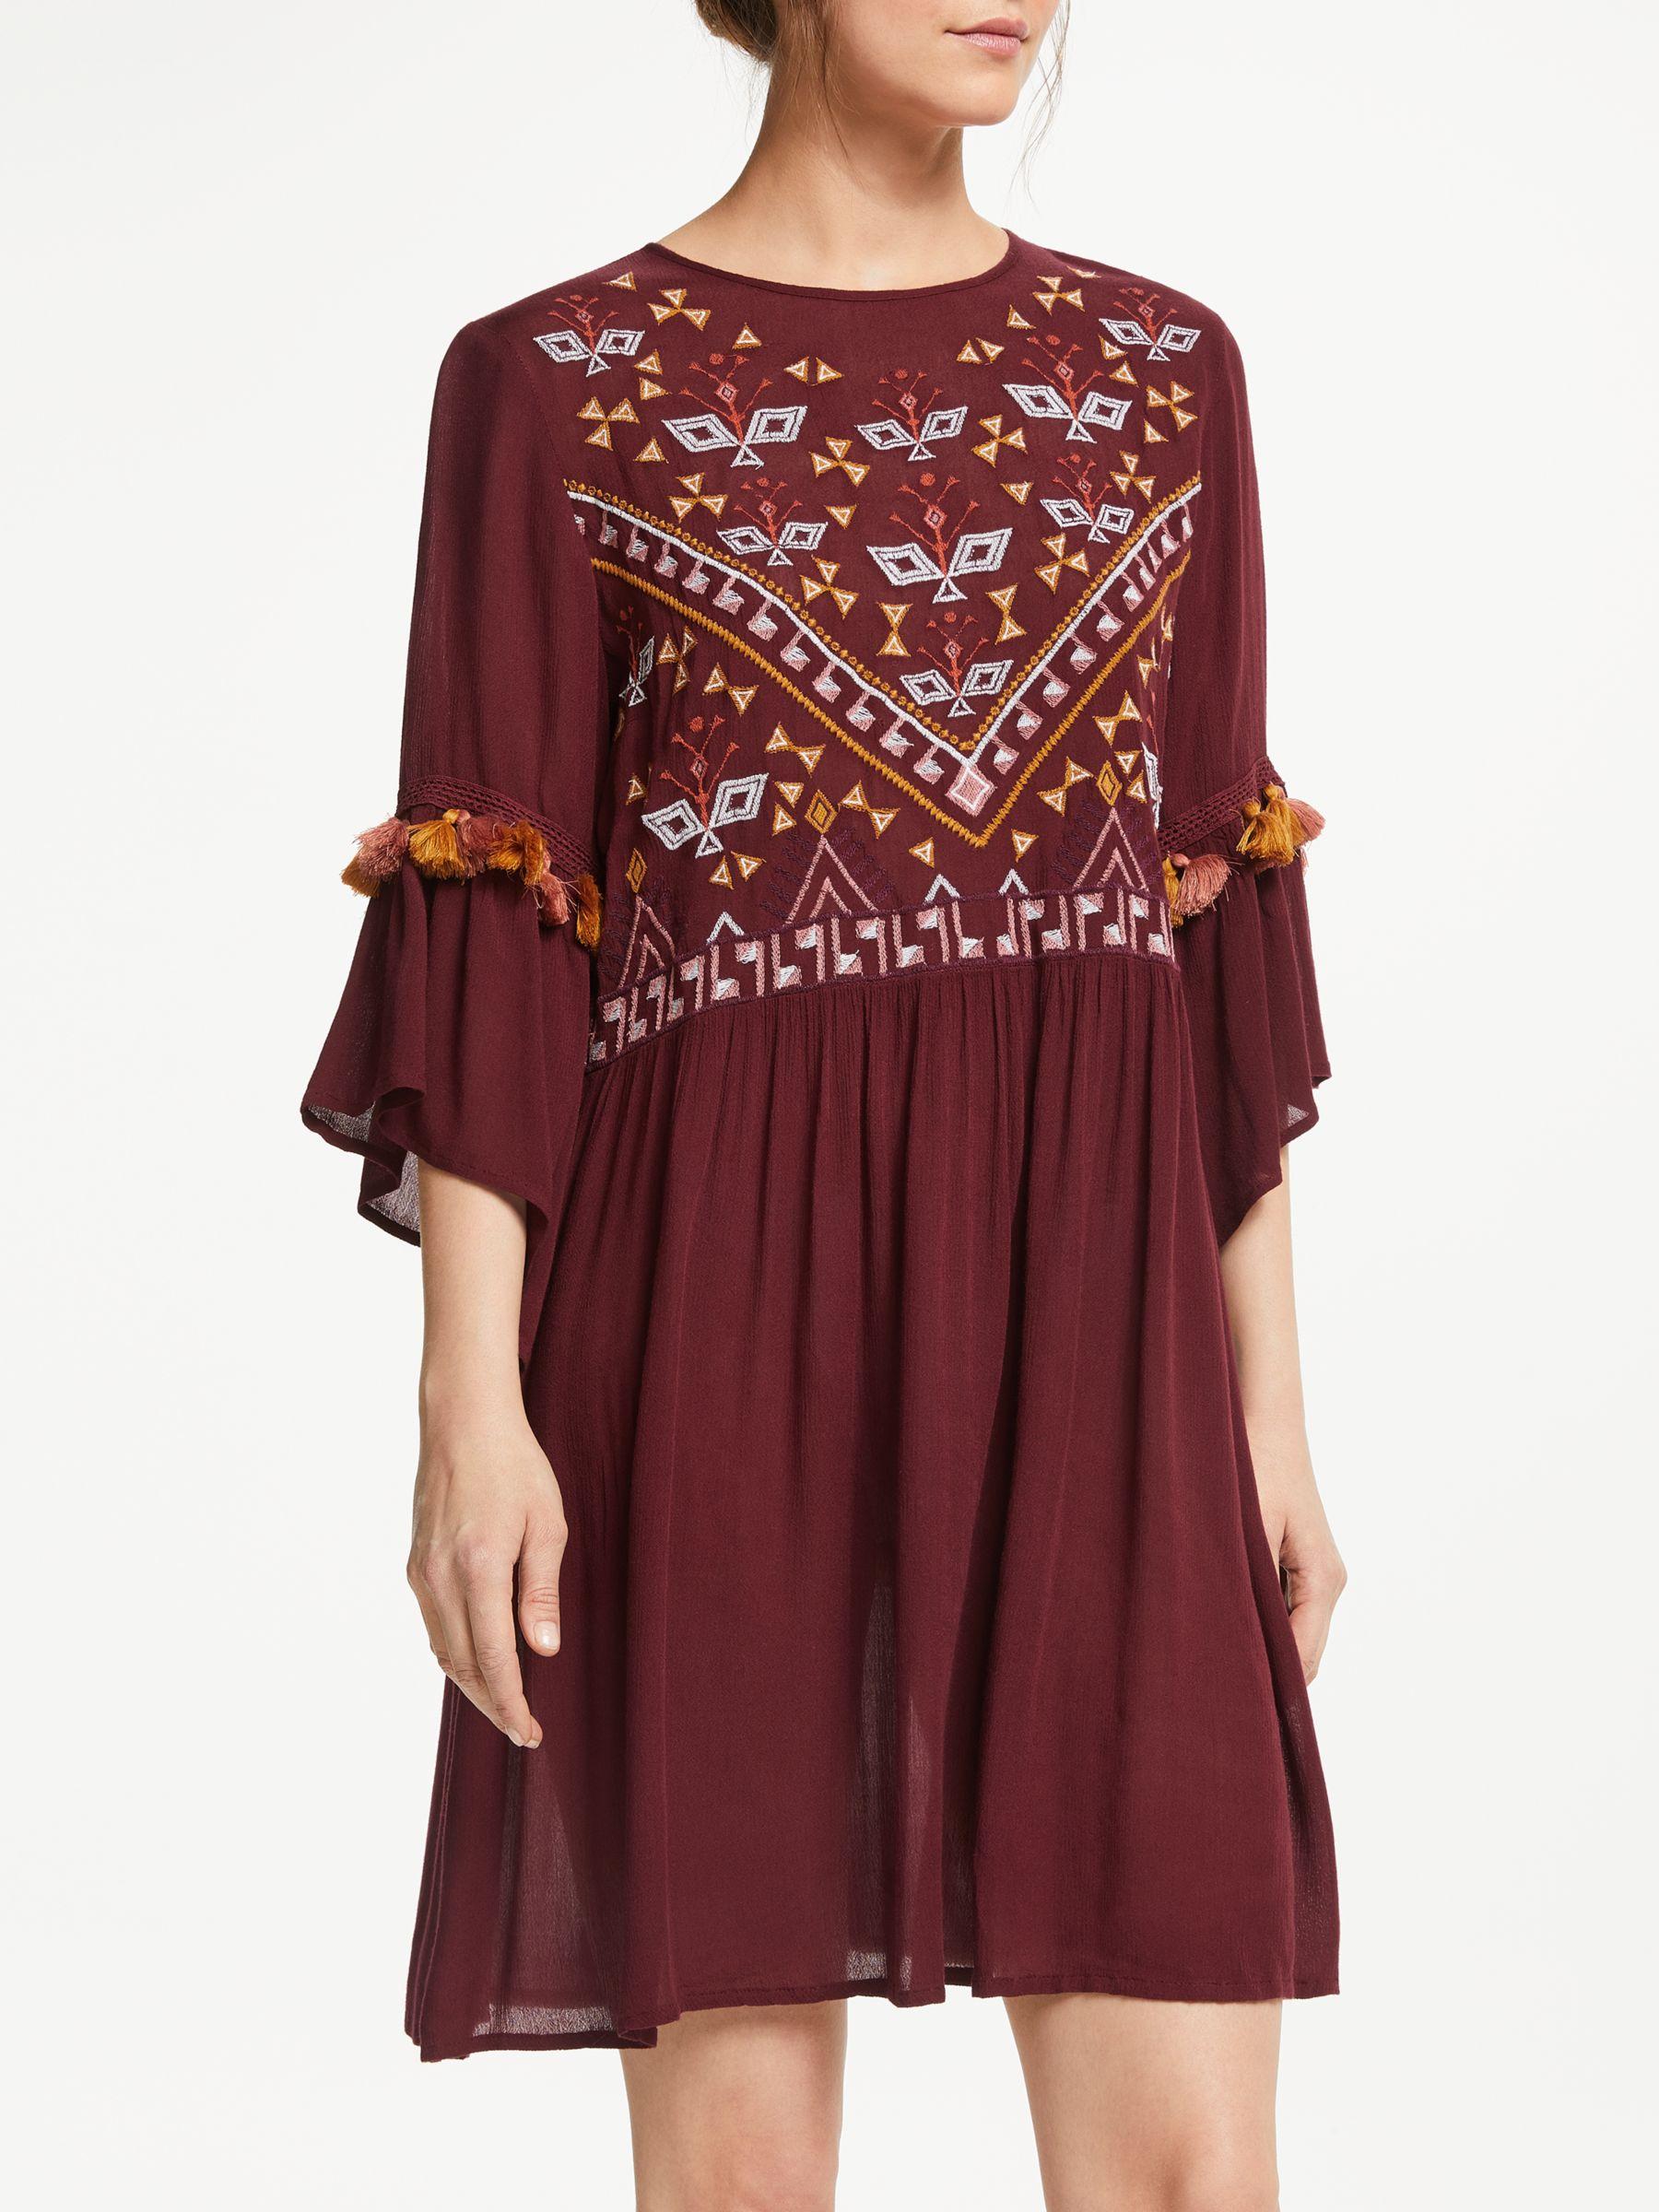 Y.A.S Synthetic Chella Tunic Dress in Burgundy (Red) - Lyst